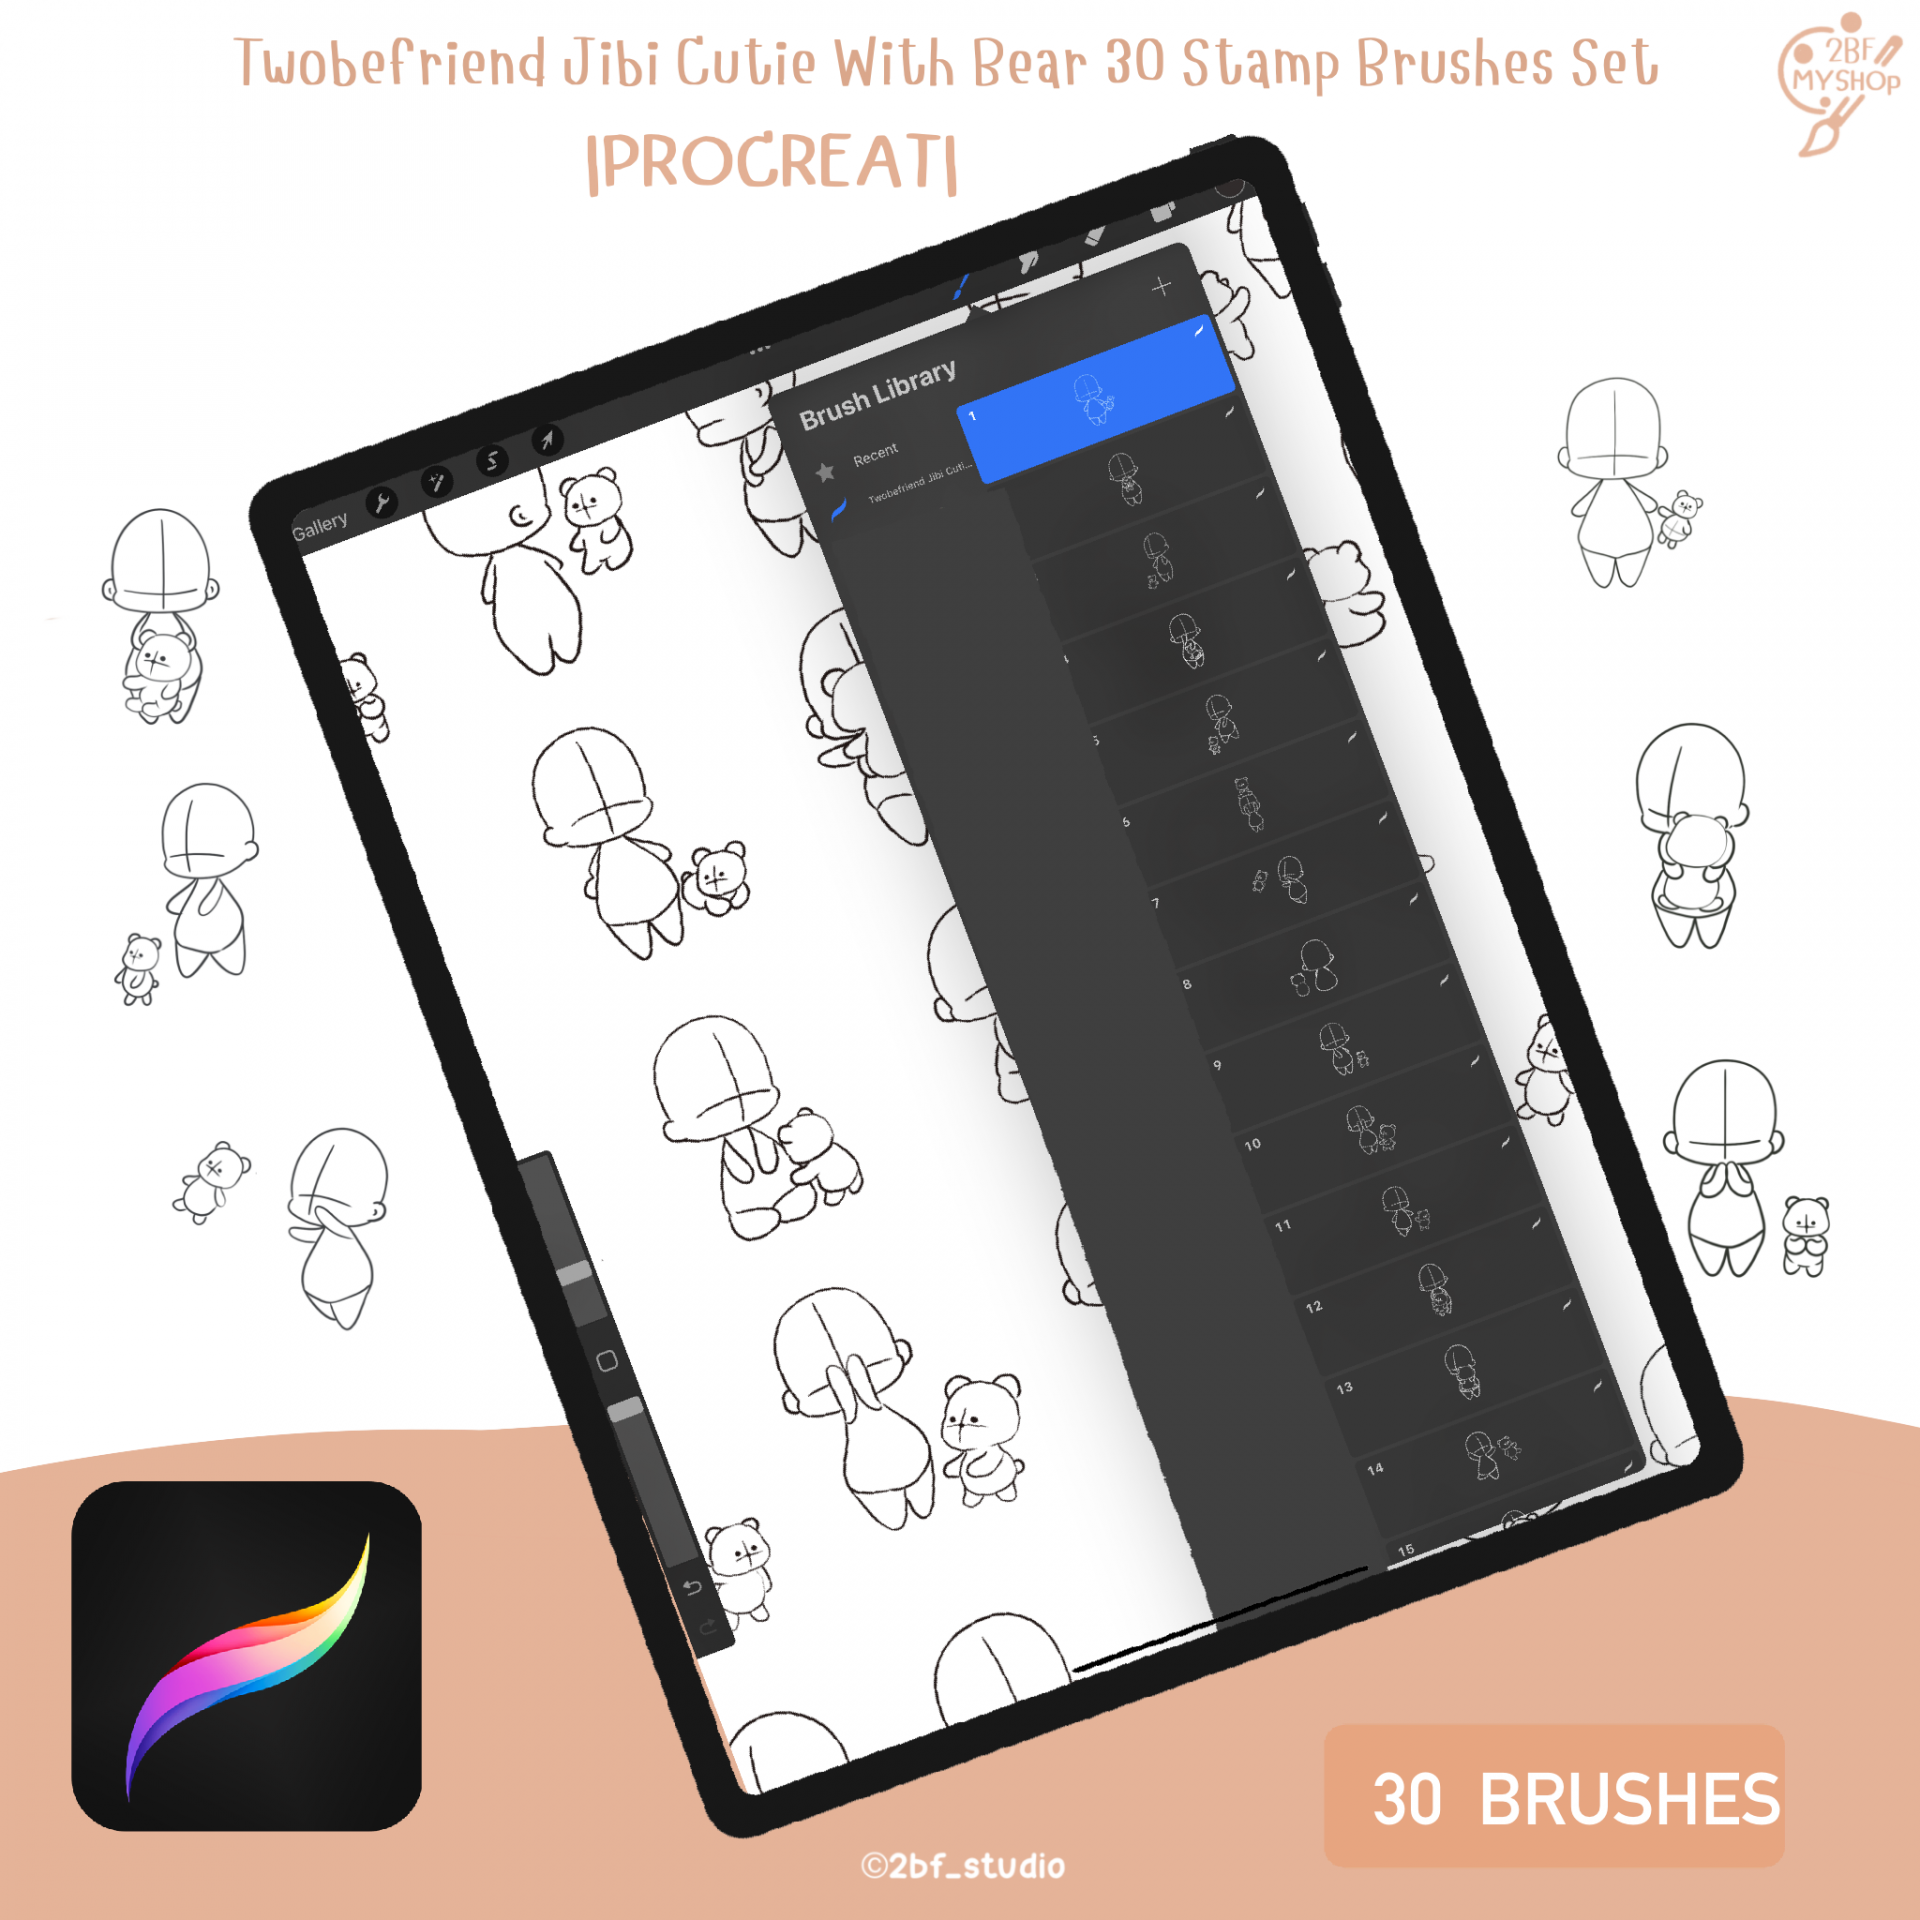 Twobefriend Jibi Cutie With Bear 30 Stamp Brushes Set |PROCREAT BRUSHED|